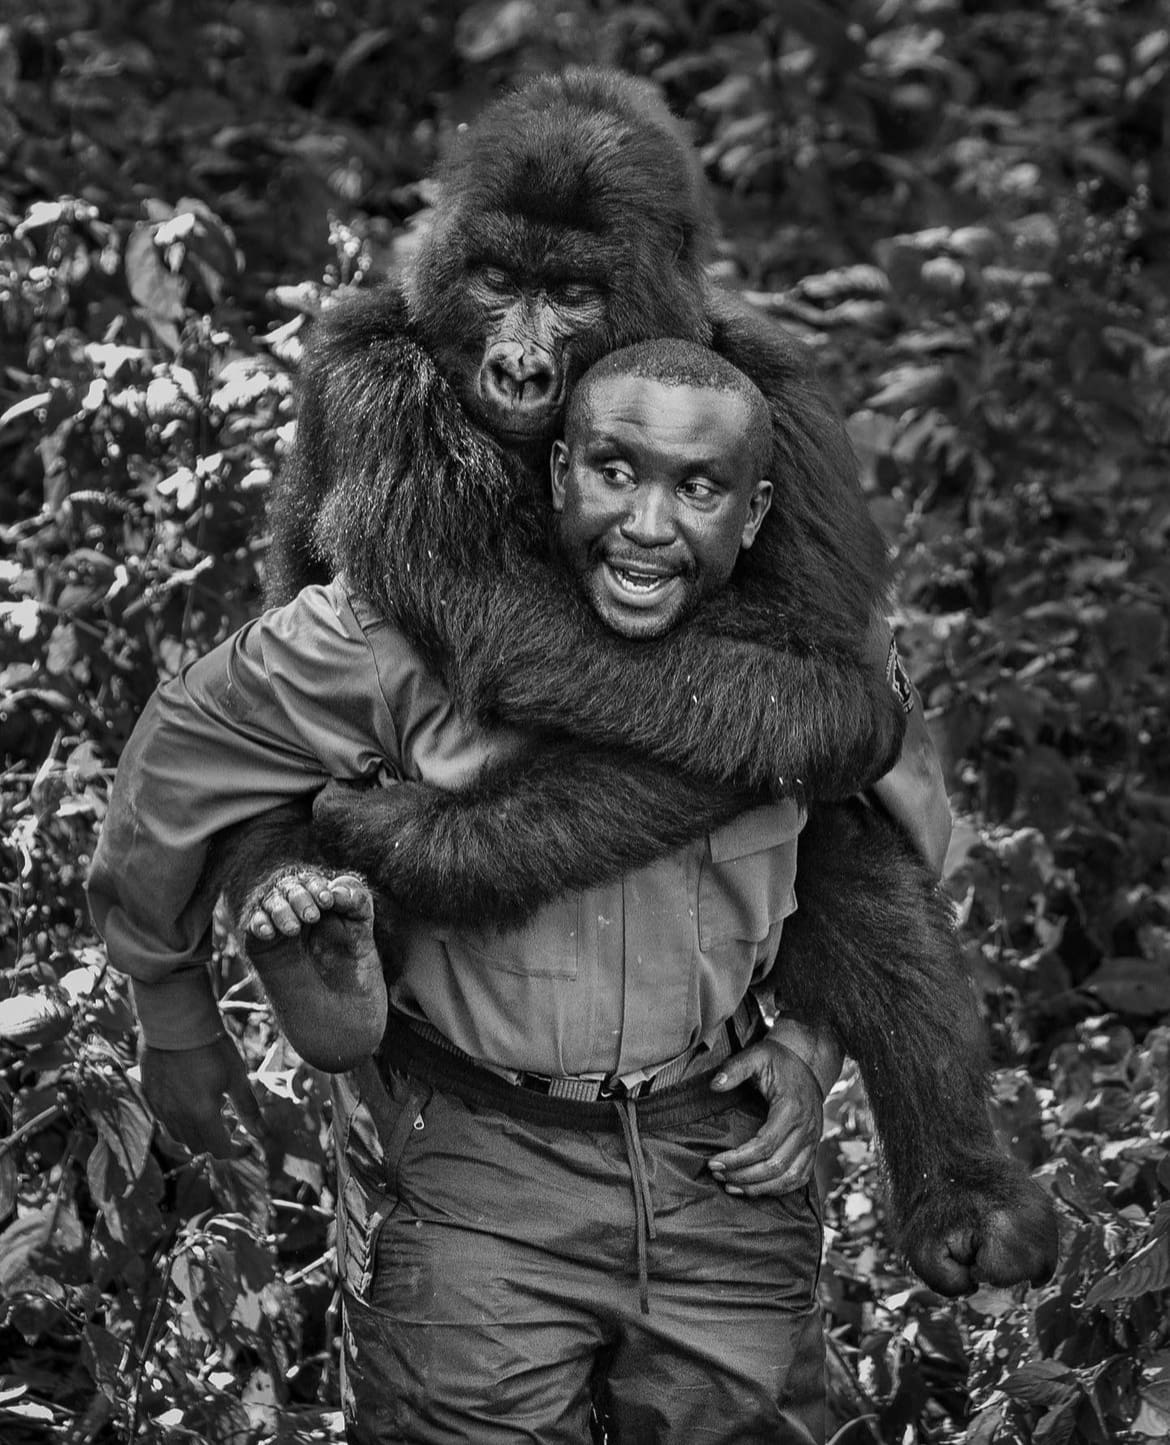 A field ranger carrying a young gorilla on his back